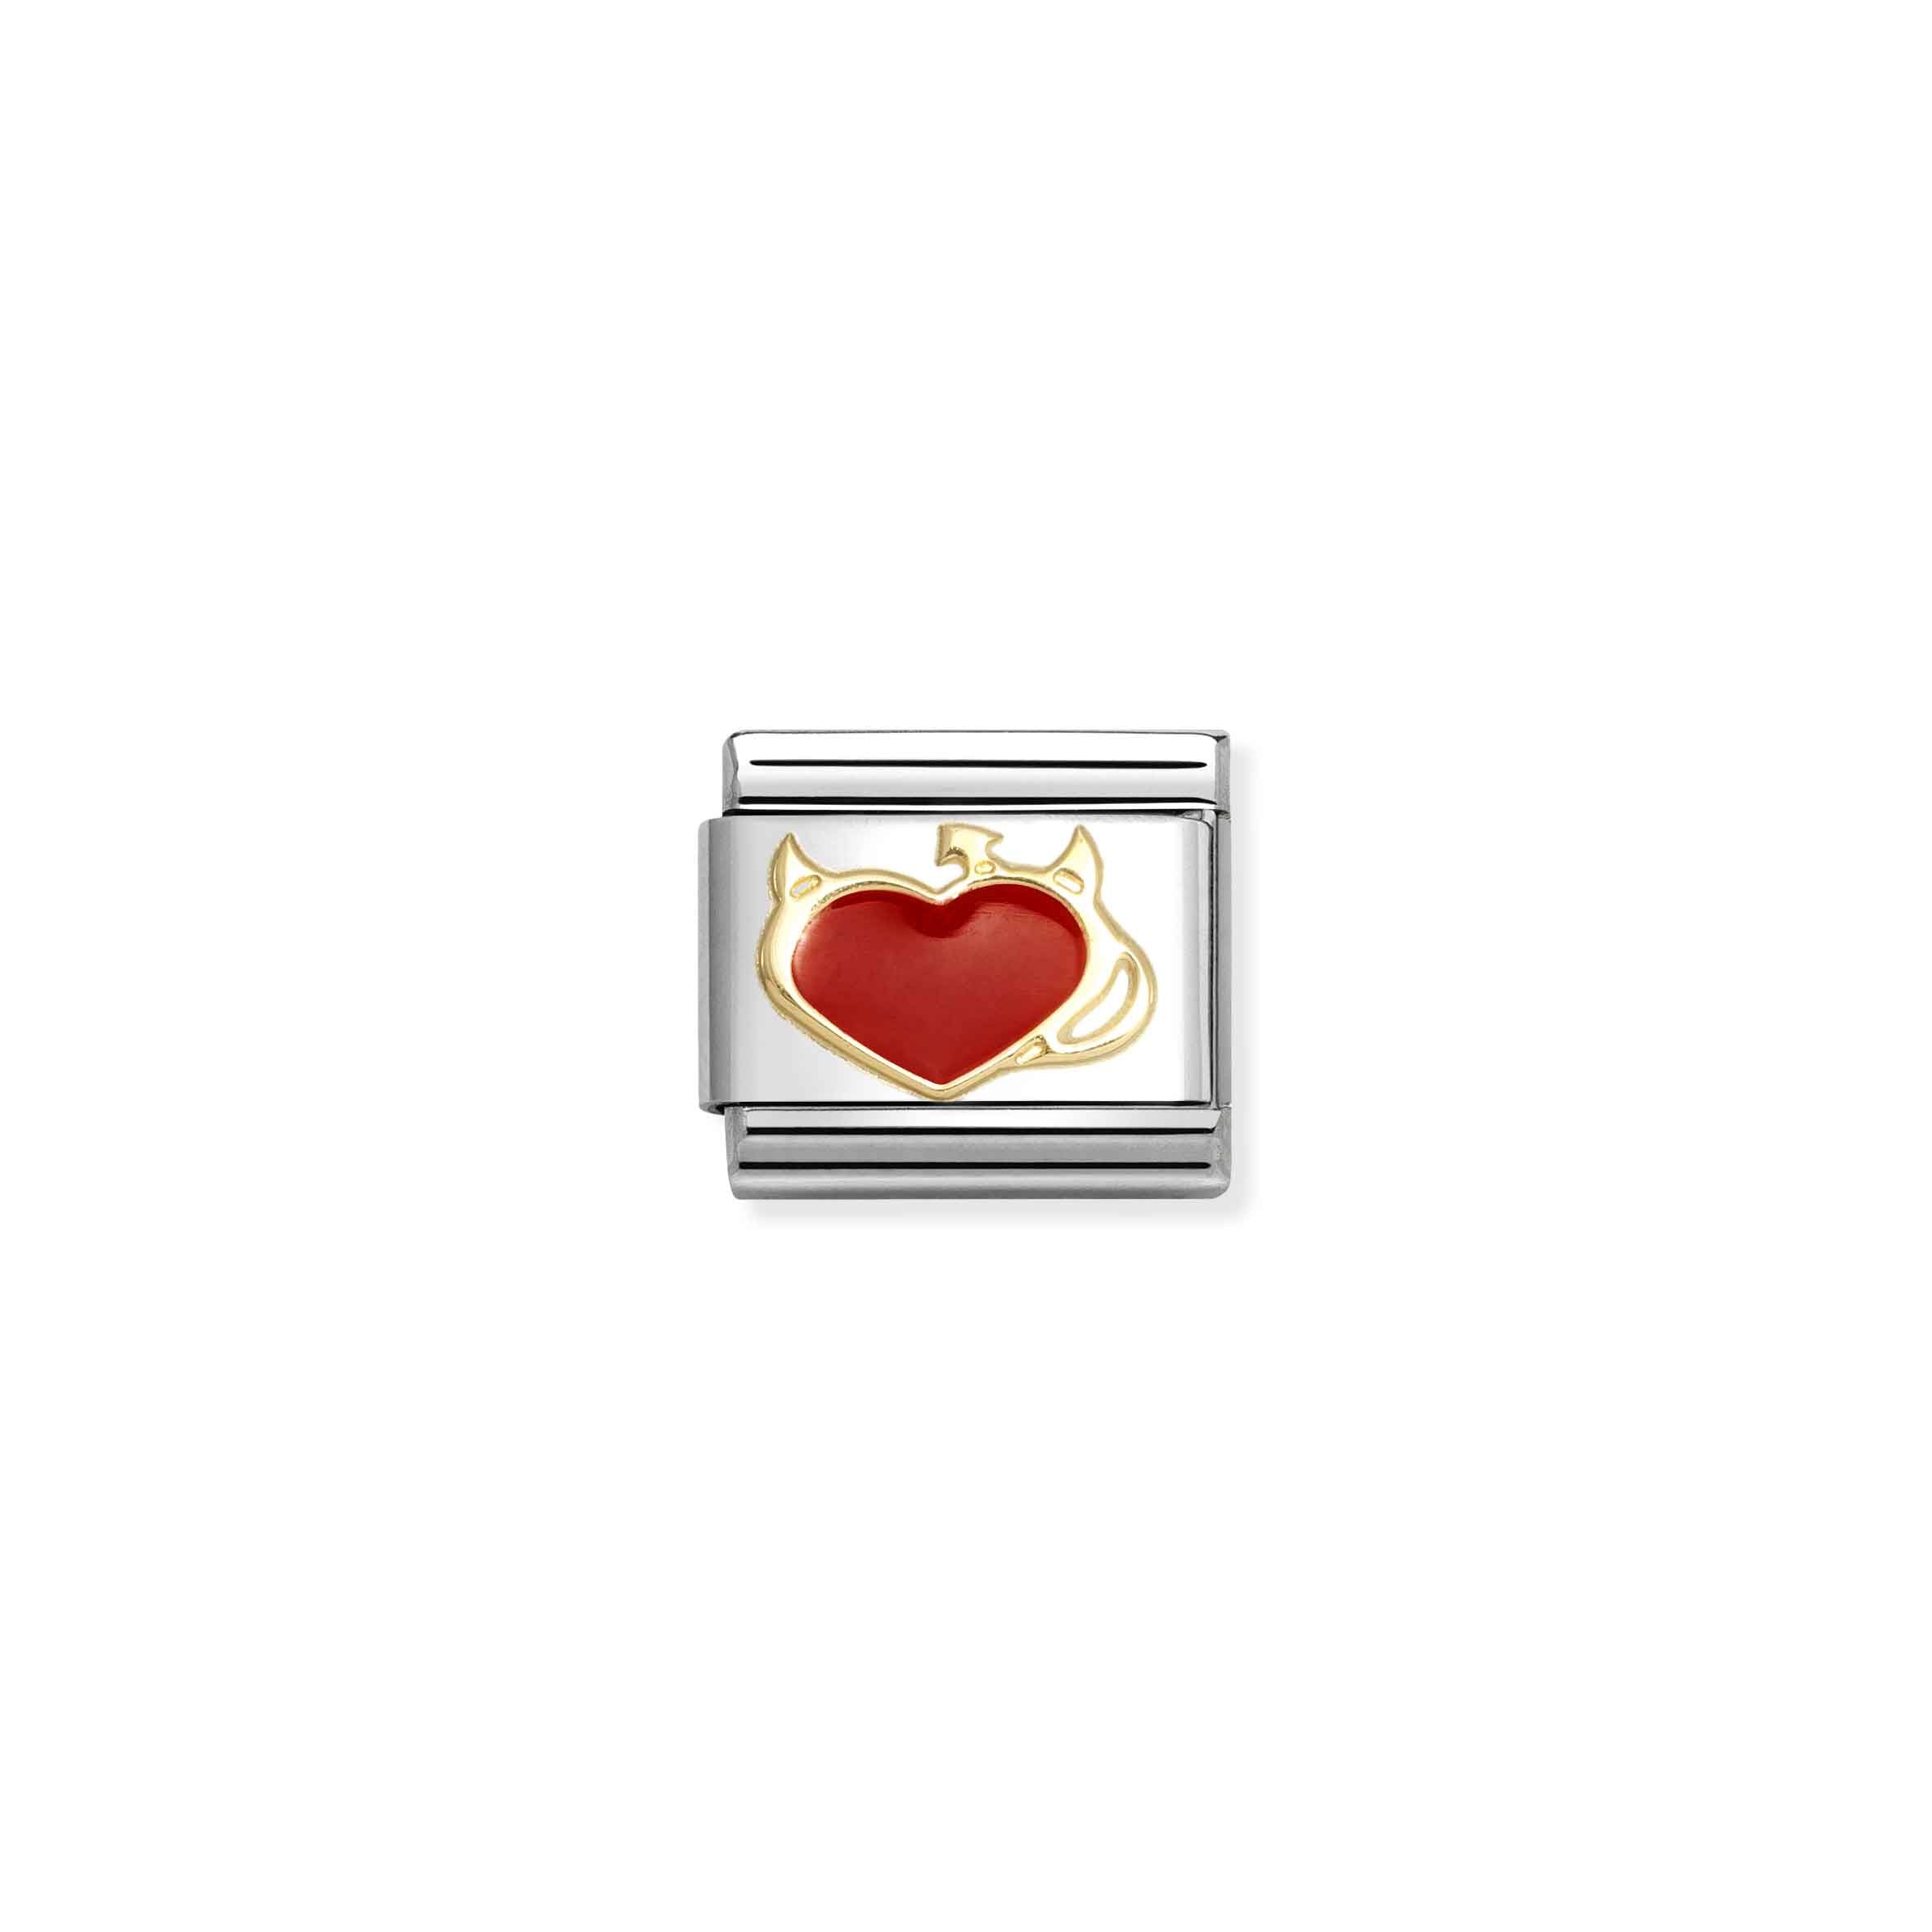 Nomination Yellow Gold Devil Heart Charm